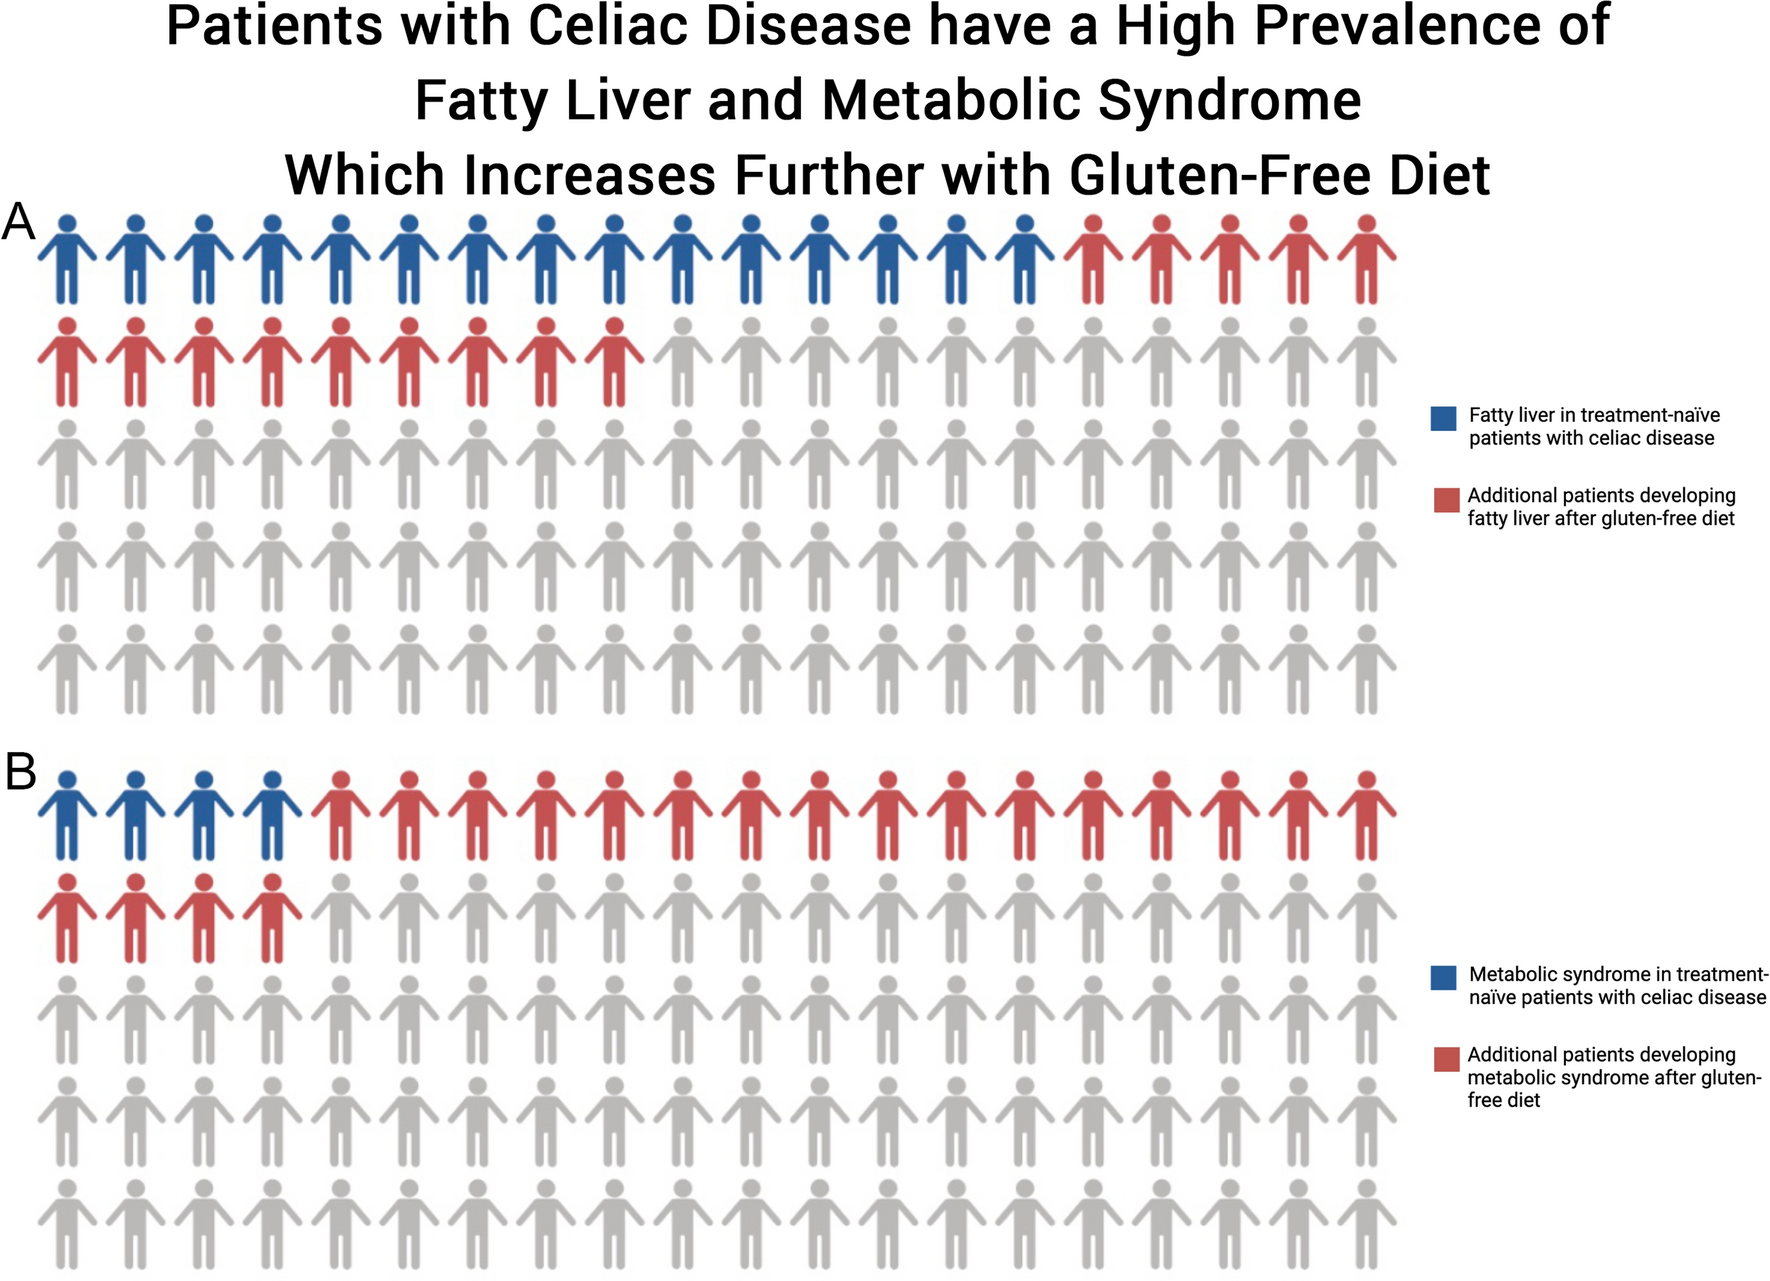 Patients with Celiac Disease Have High Prevalence of Fatty Liver and Metabolic Syndrome